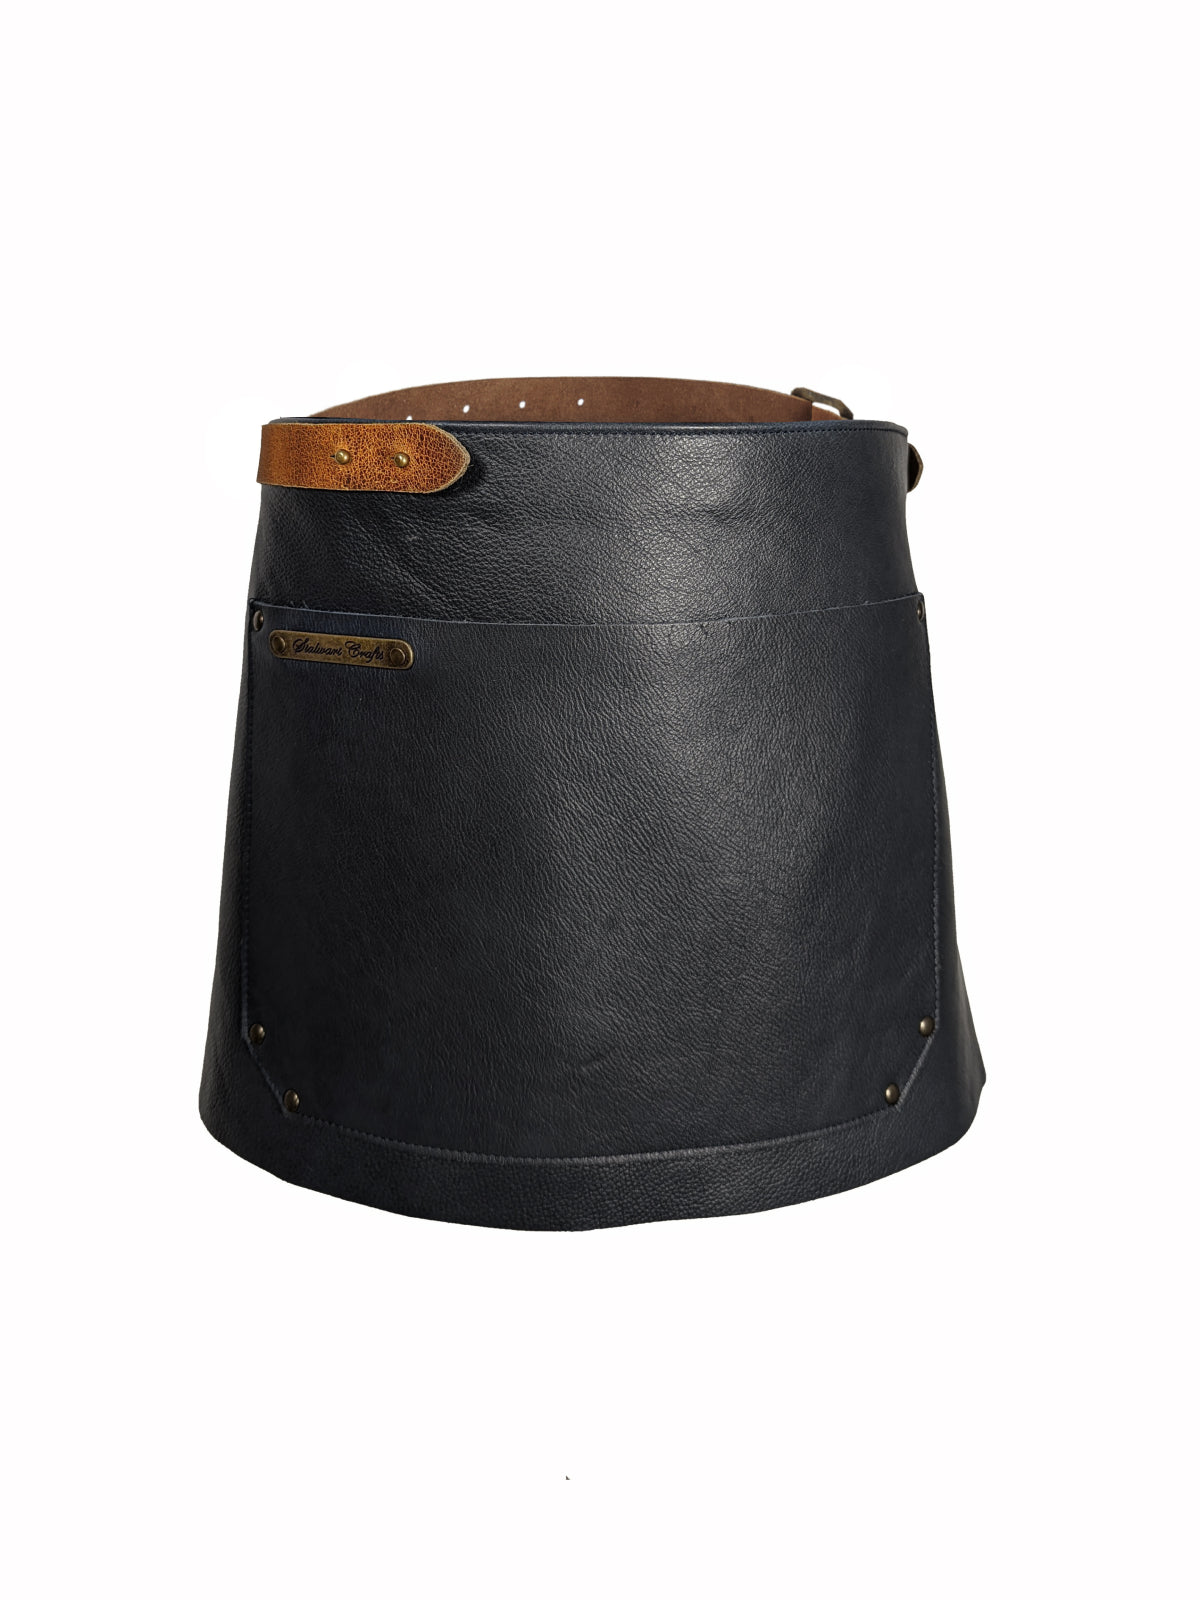 Leather Waist Apron Deluxe Black by Stalwart -  ChefsCotton